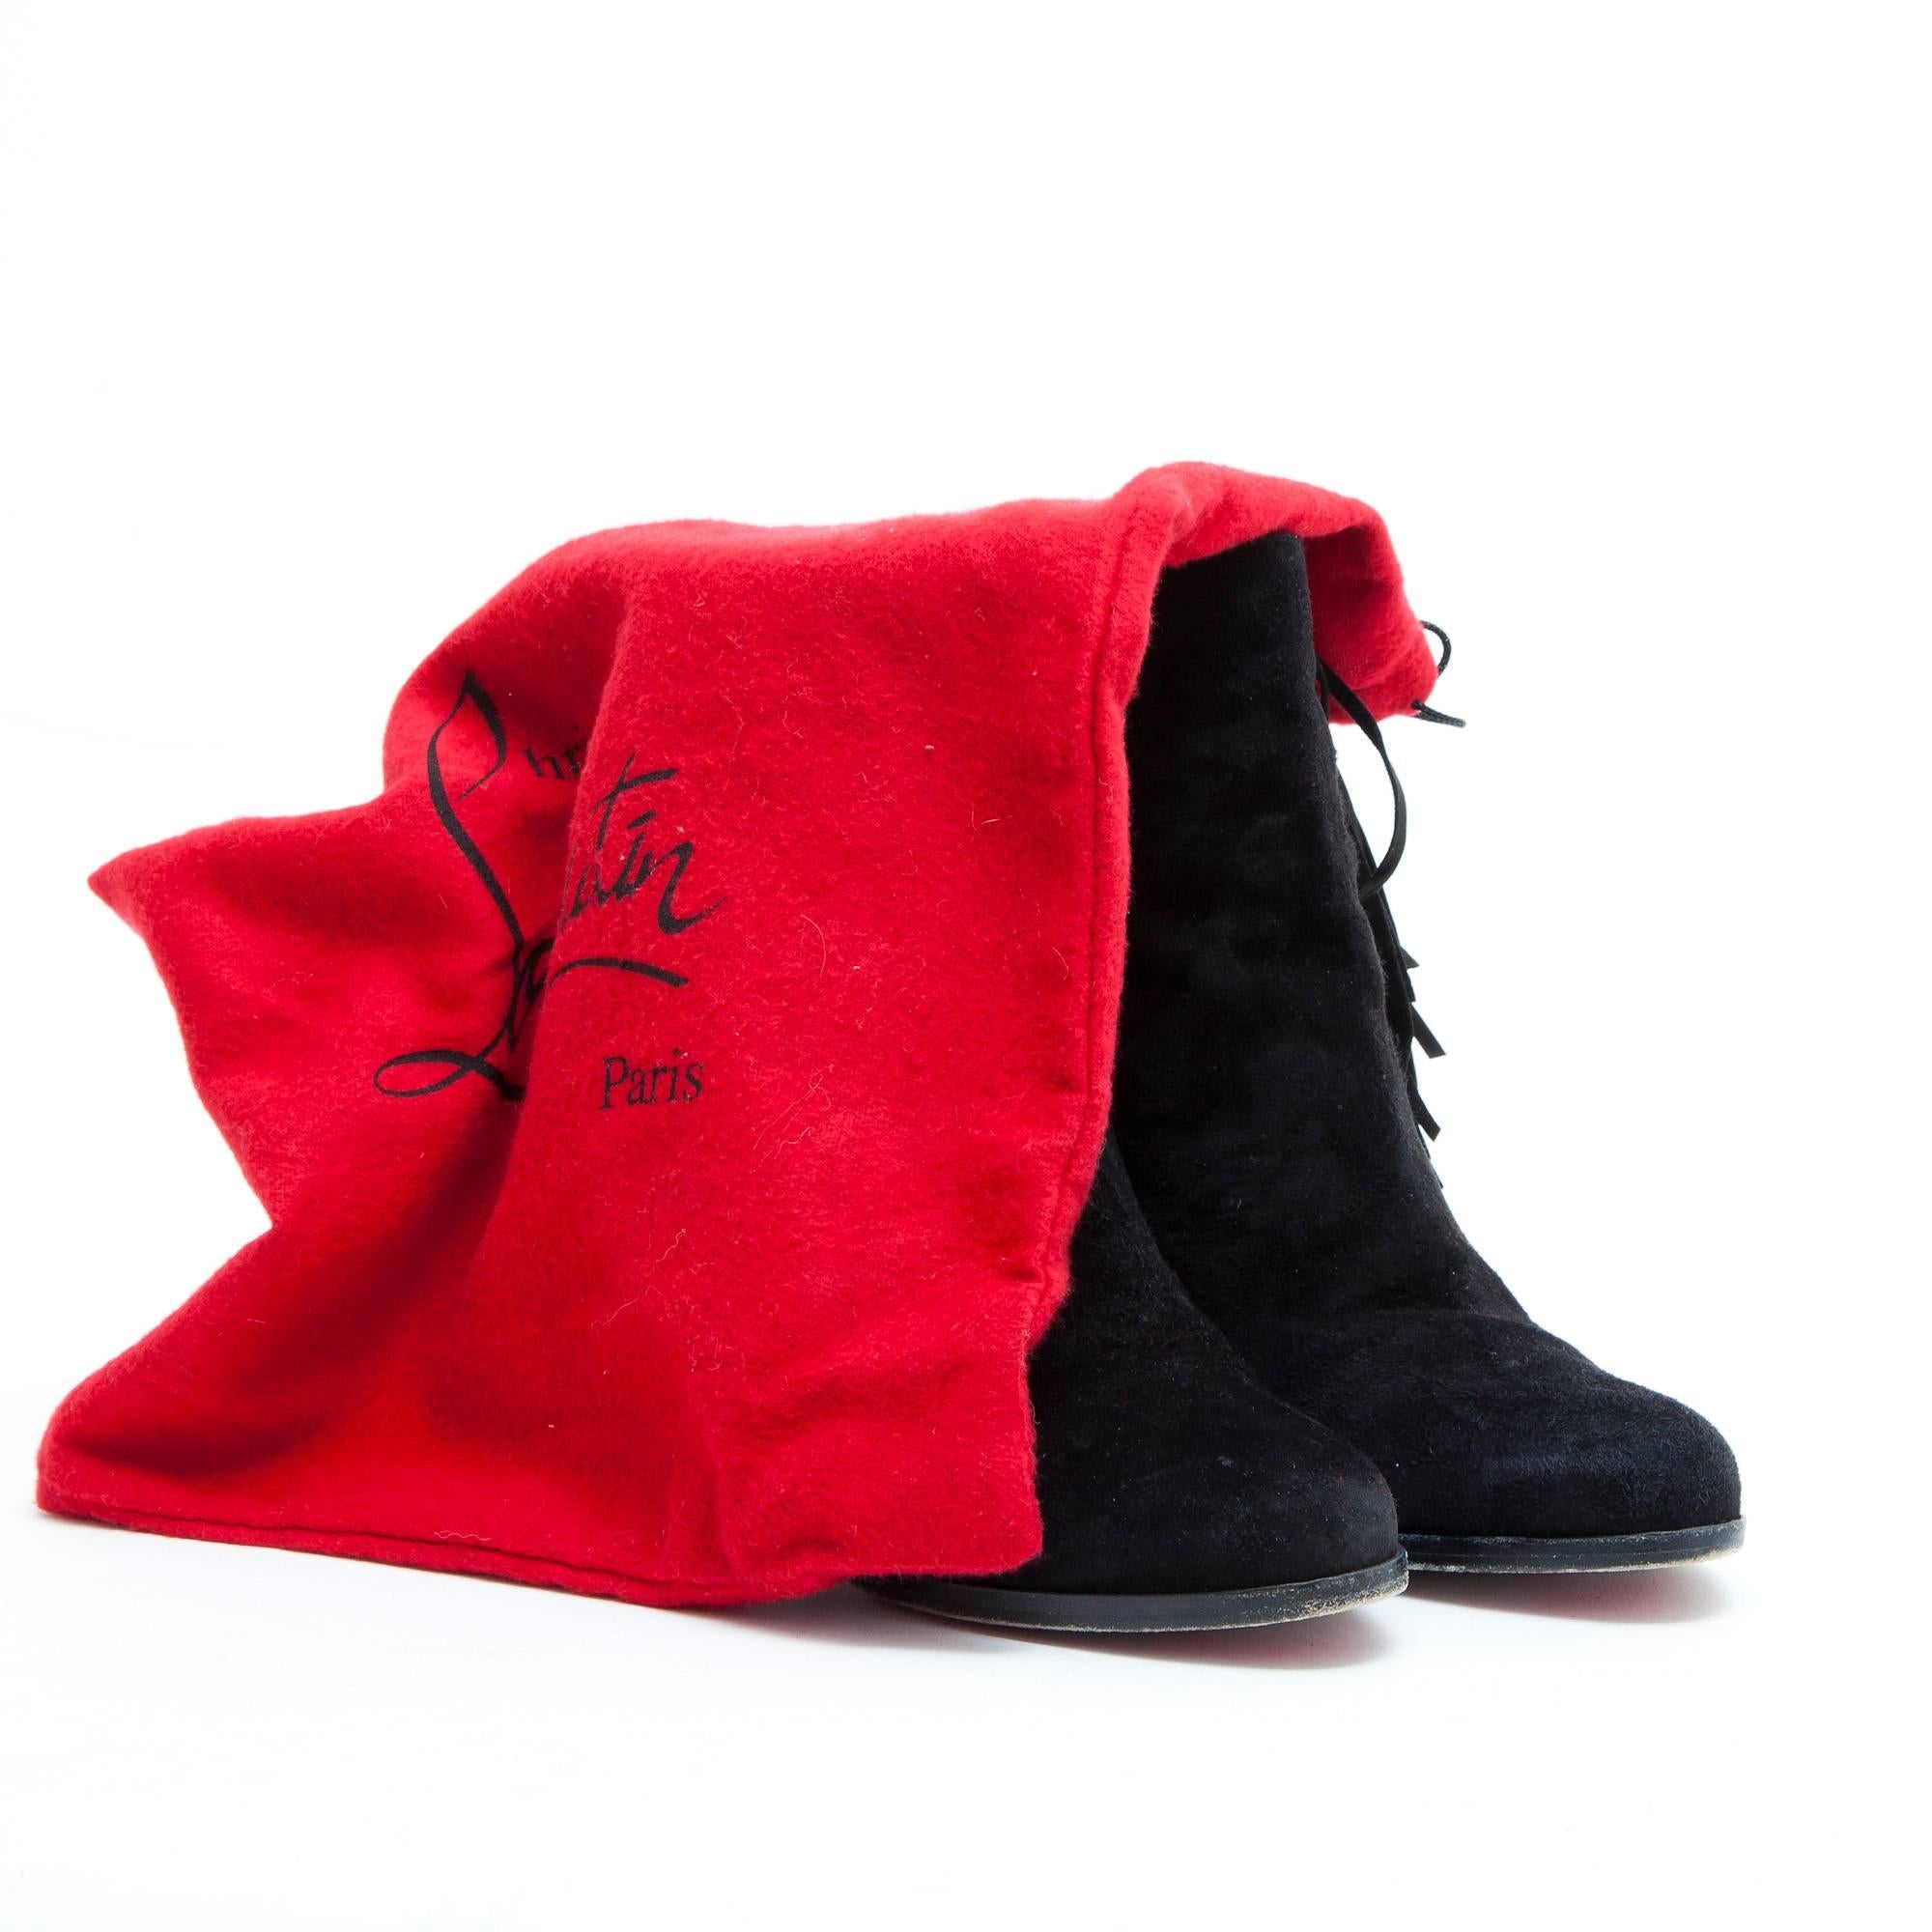 CHRISTIAN LOUBOUTIN Ankle Boots in Black Suede Calfskin Size 39FR 3